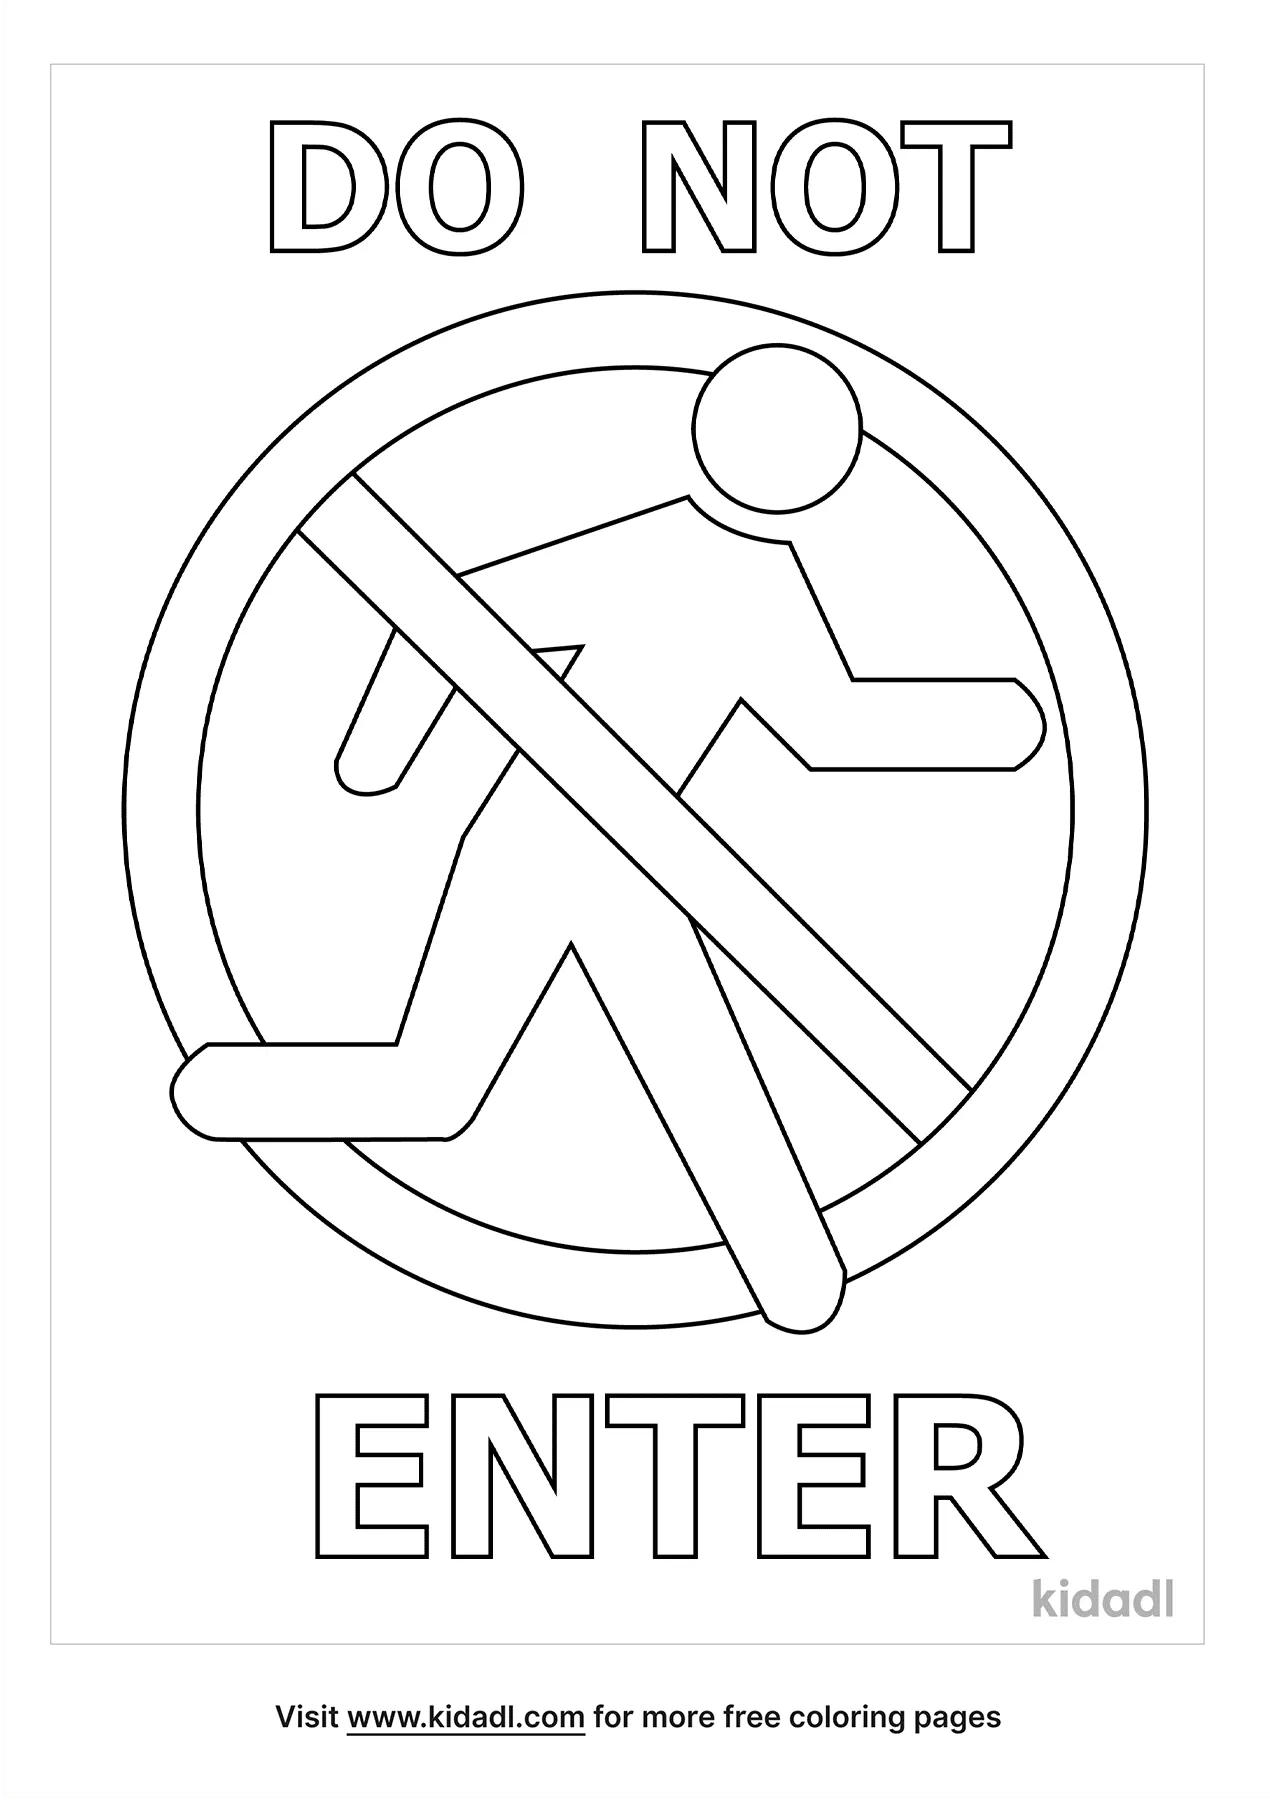 Do Not Enter Coloring Page